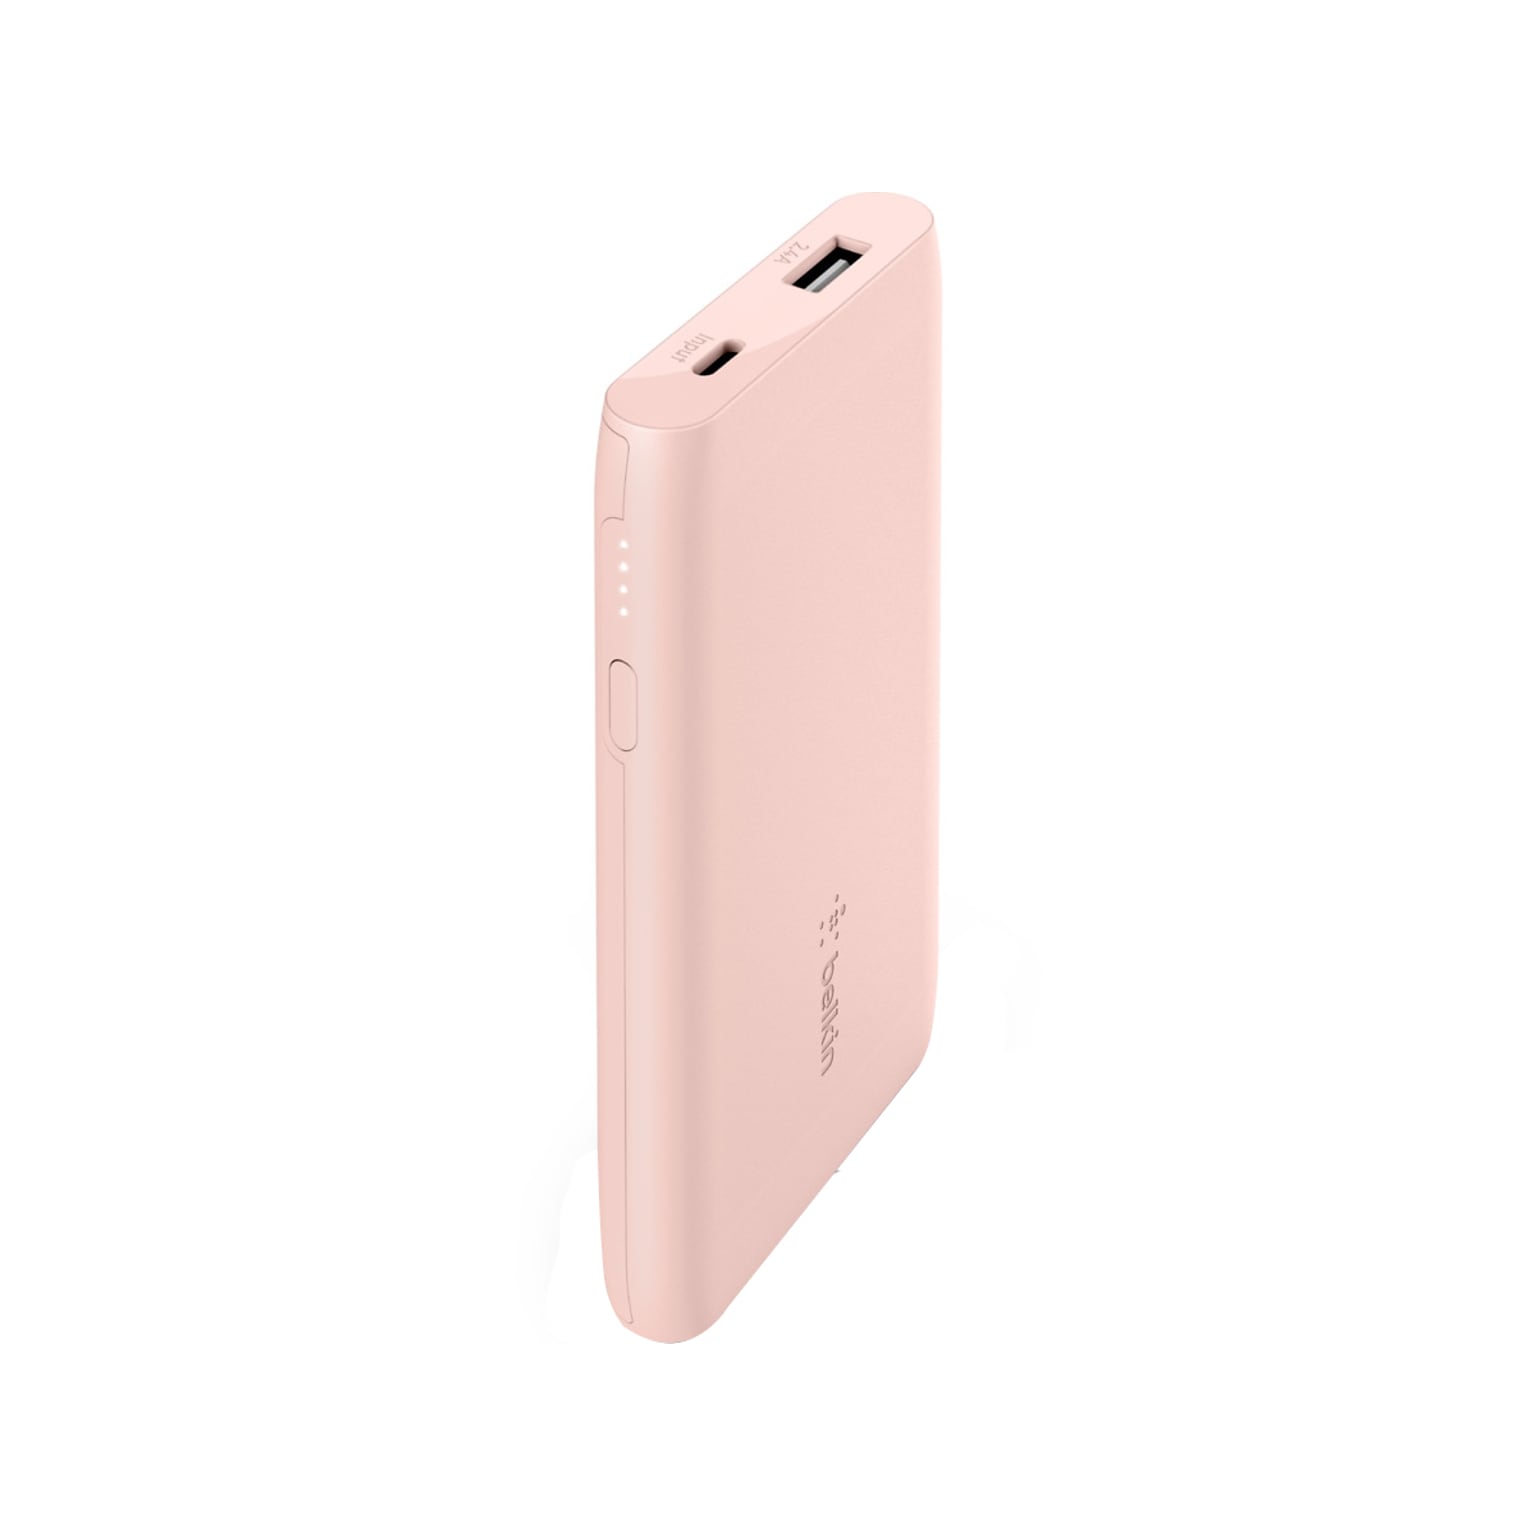 Belkin BOOST CHARGE USB Power Bank for Most Smartphones, 5000mAh, Rose Gold (BPB004BTC00)